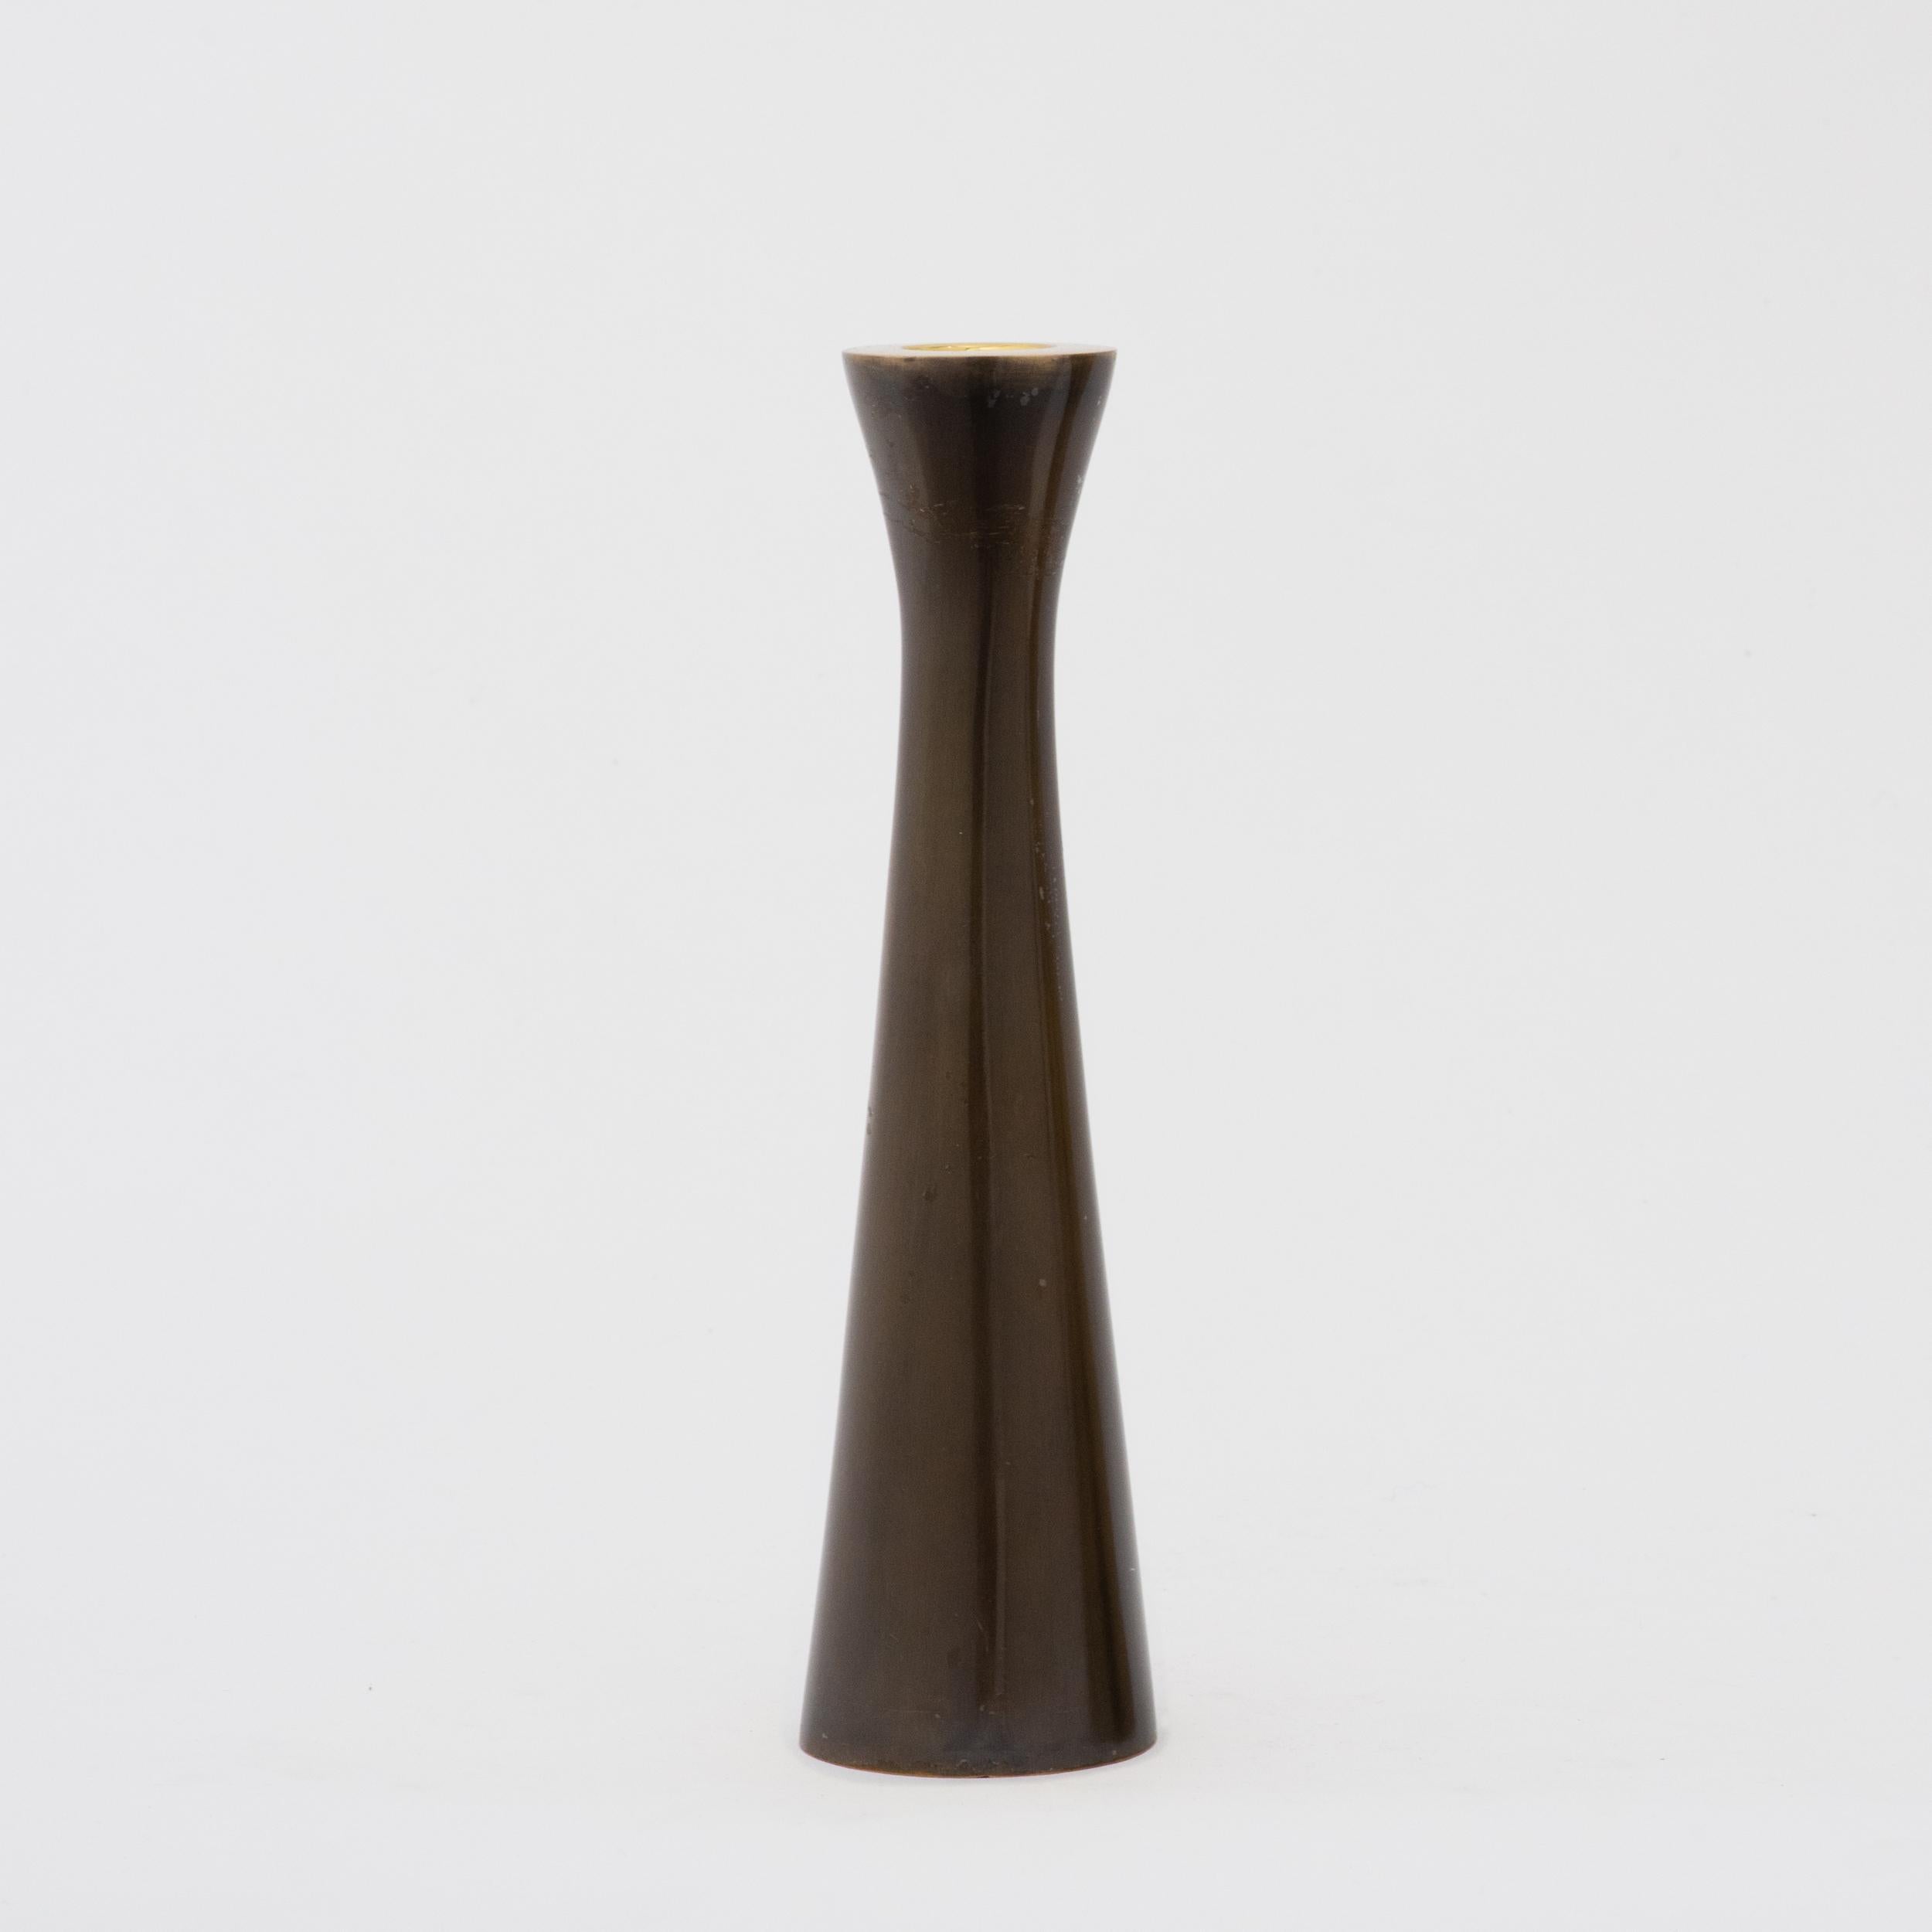 Tall tapered candleholder cast in brass with a bronze patina finish. Also available in brass with a brushed finish.

Measures: Height 21.7 cm / 8.5 in
Diameter 5.3 cm / 2 in.